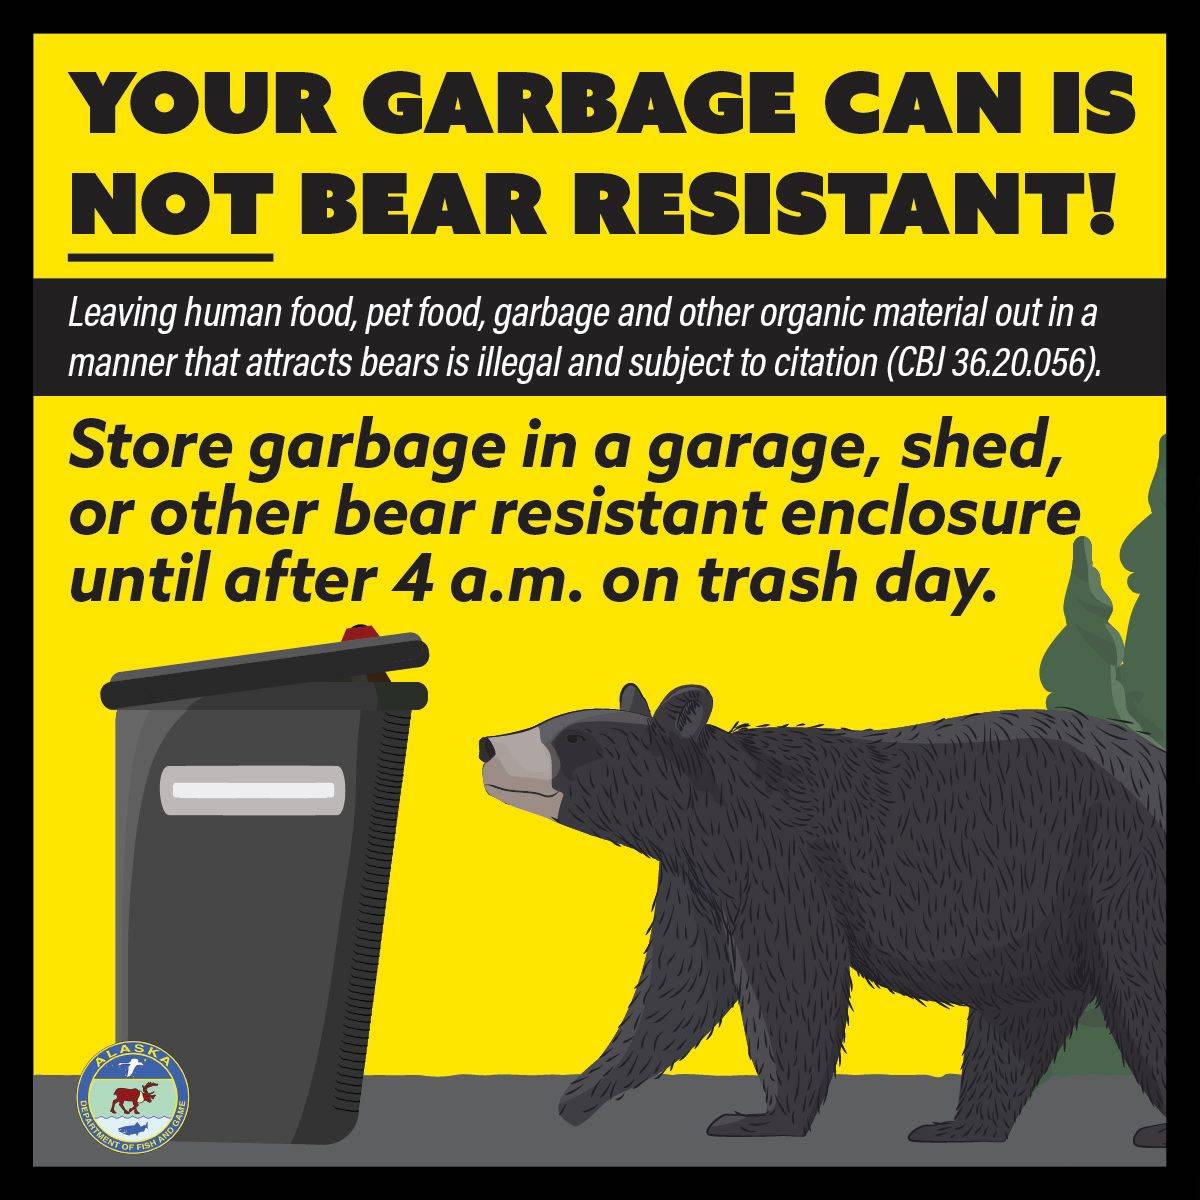 The Juneau Bear Committee will be identifying and tagging trash cans that lack bear-resistant characteristics with these stickers the week of Aug. 31. (Courtesy art / Juneau Police Department)